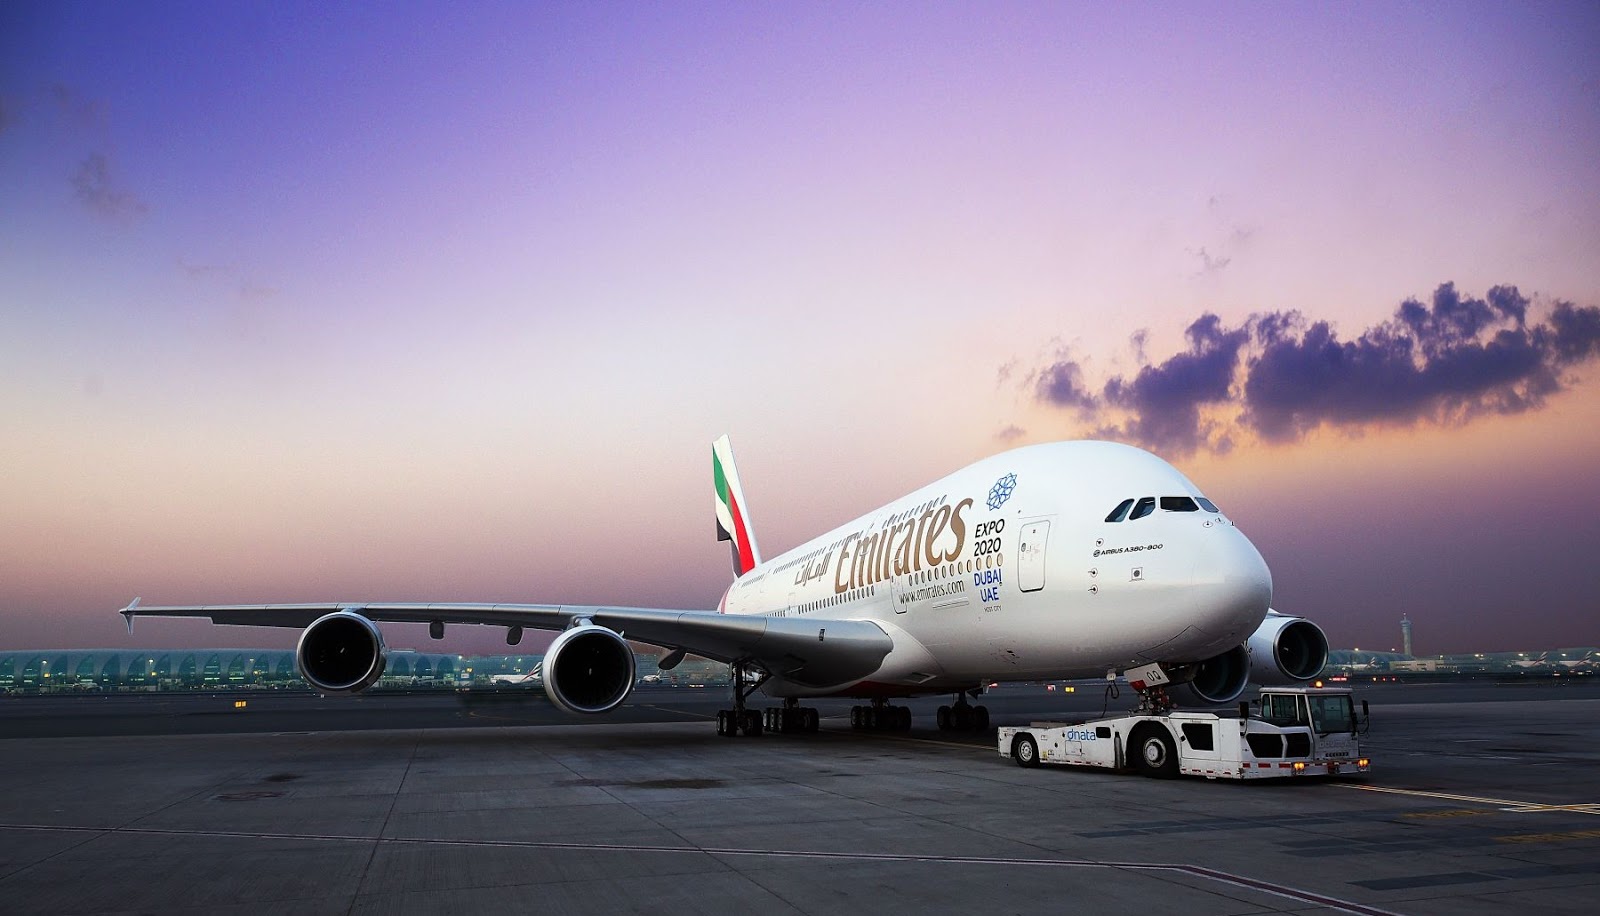 Emirates A380 Is Being Towed - A380 Emirates In Dubai International Airport - HD Wallpaper 